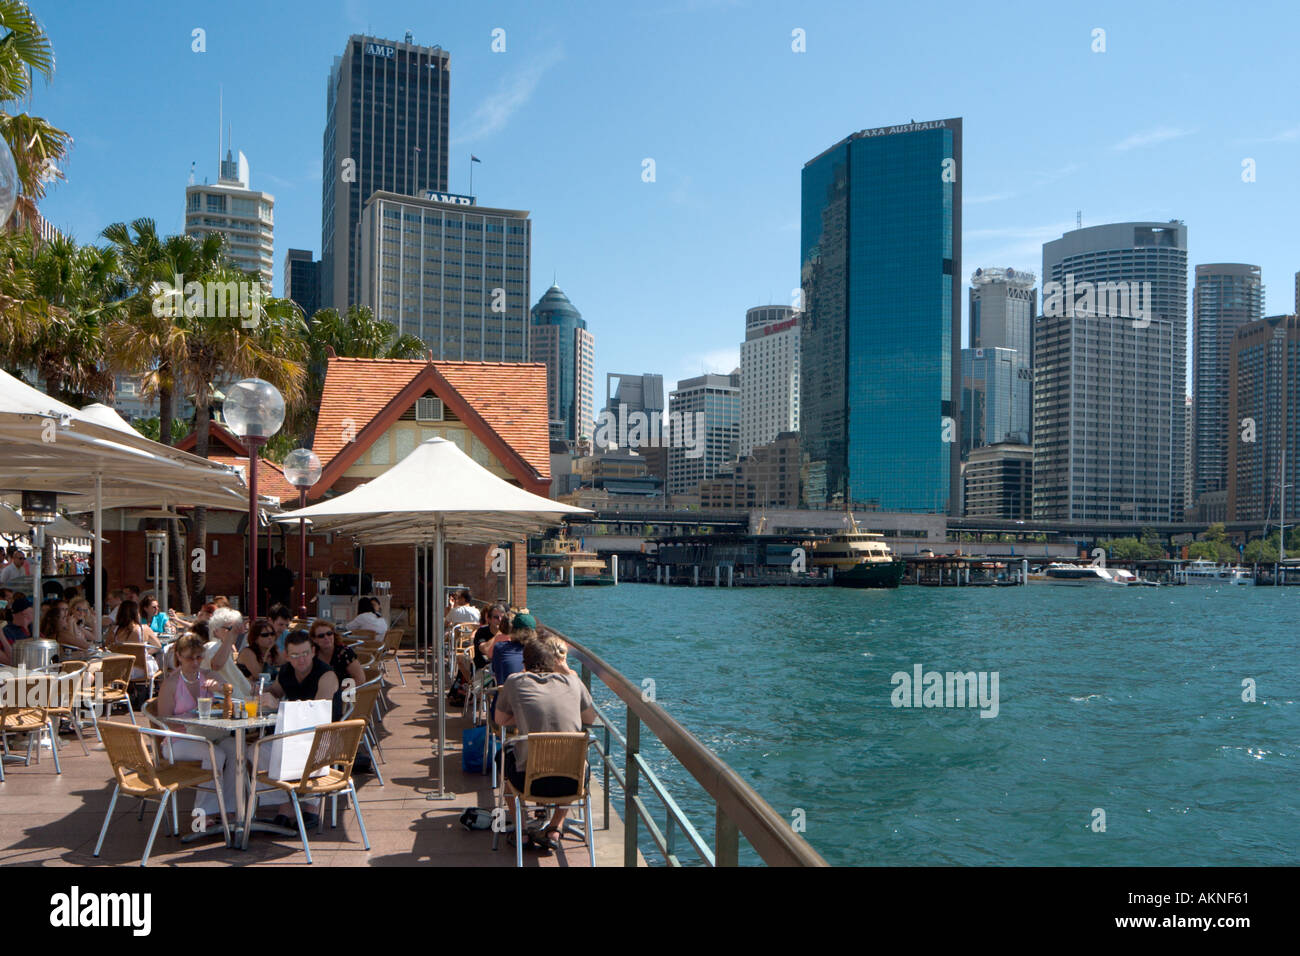 City skyline and pavement cafe in Circular Quay, Sydney, New South Wales, Australia Stock Photo